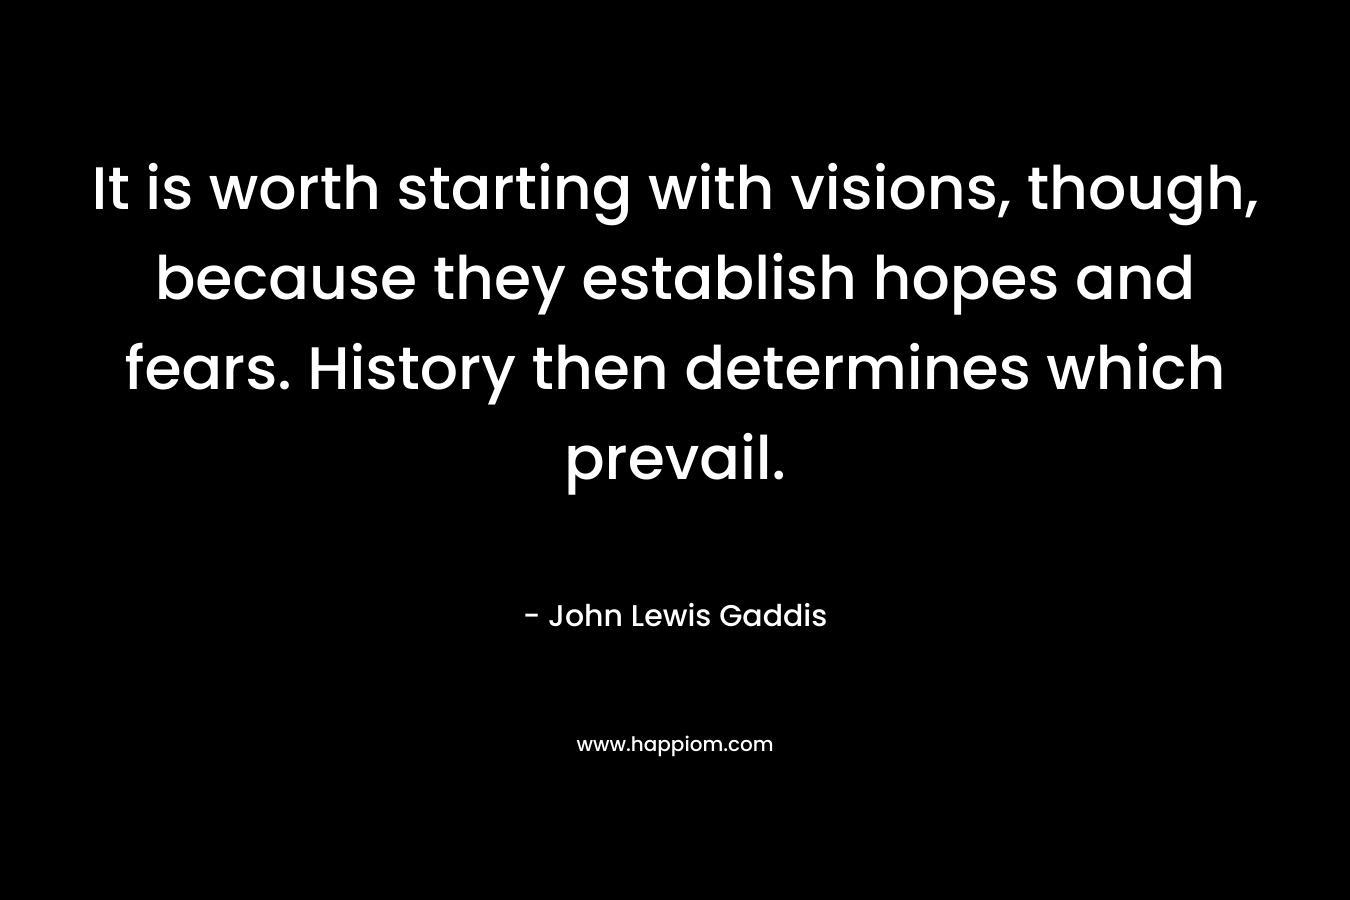 It is worth starting with visions, though, because they establish hopes and fears. History then determines which prevail.